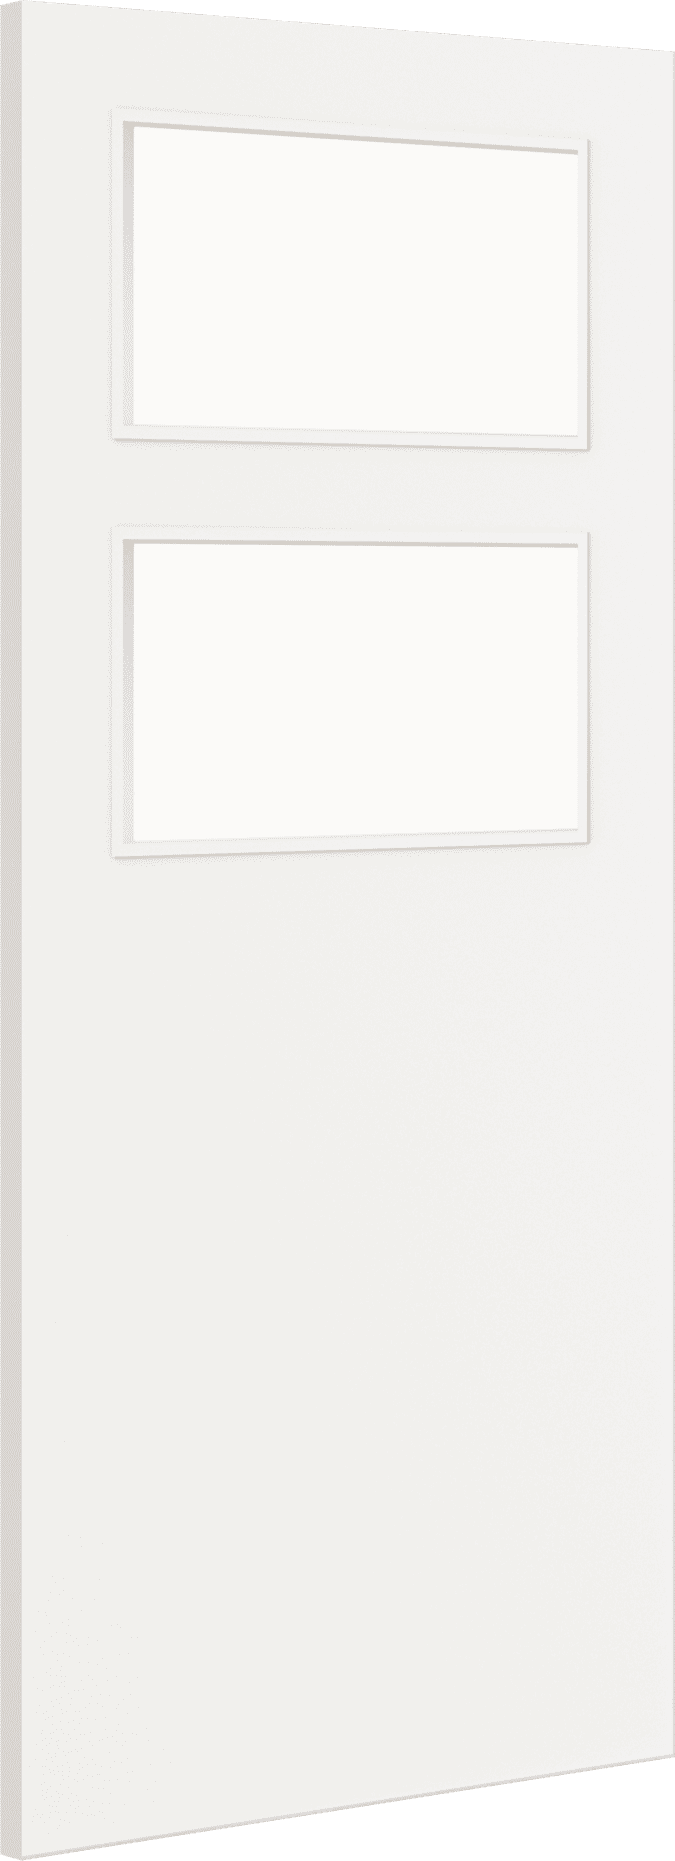 1981mm x 610mm x 44mm (24") Architectural Paint Grade White 02 Clear Glazed Fire Door Blank